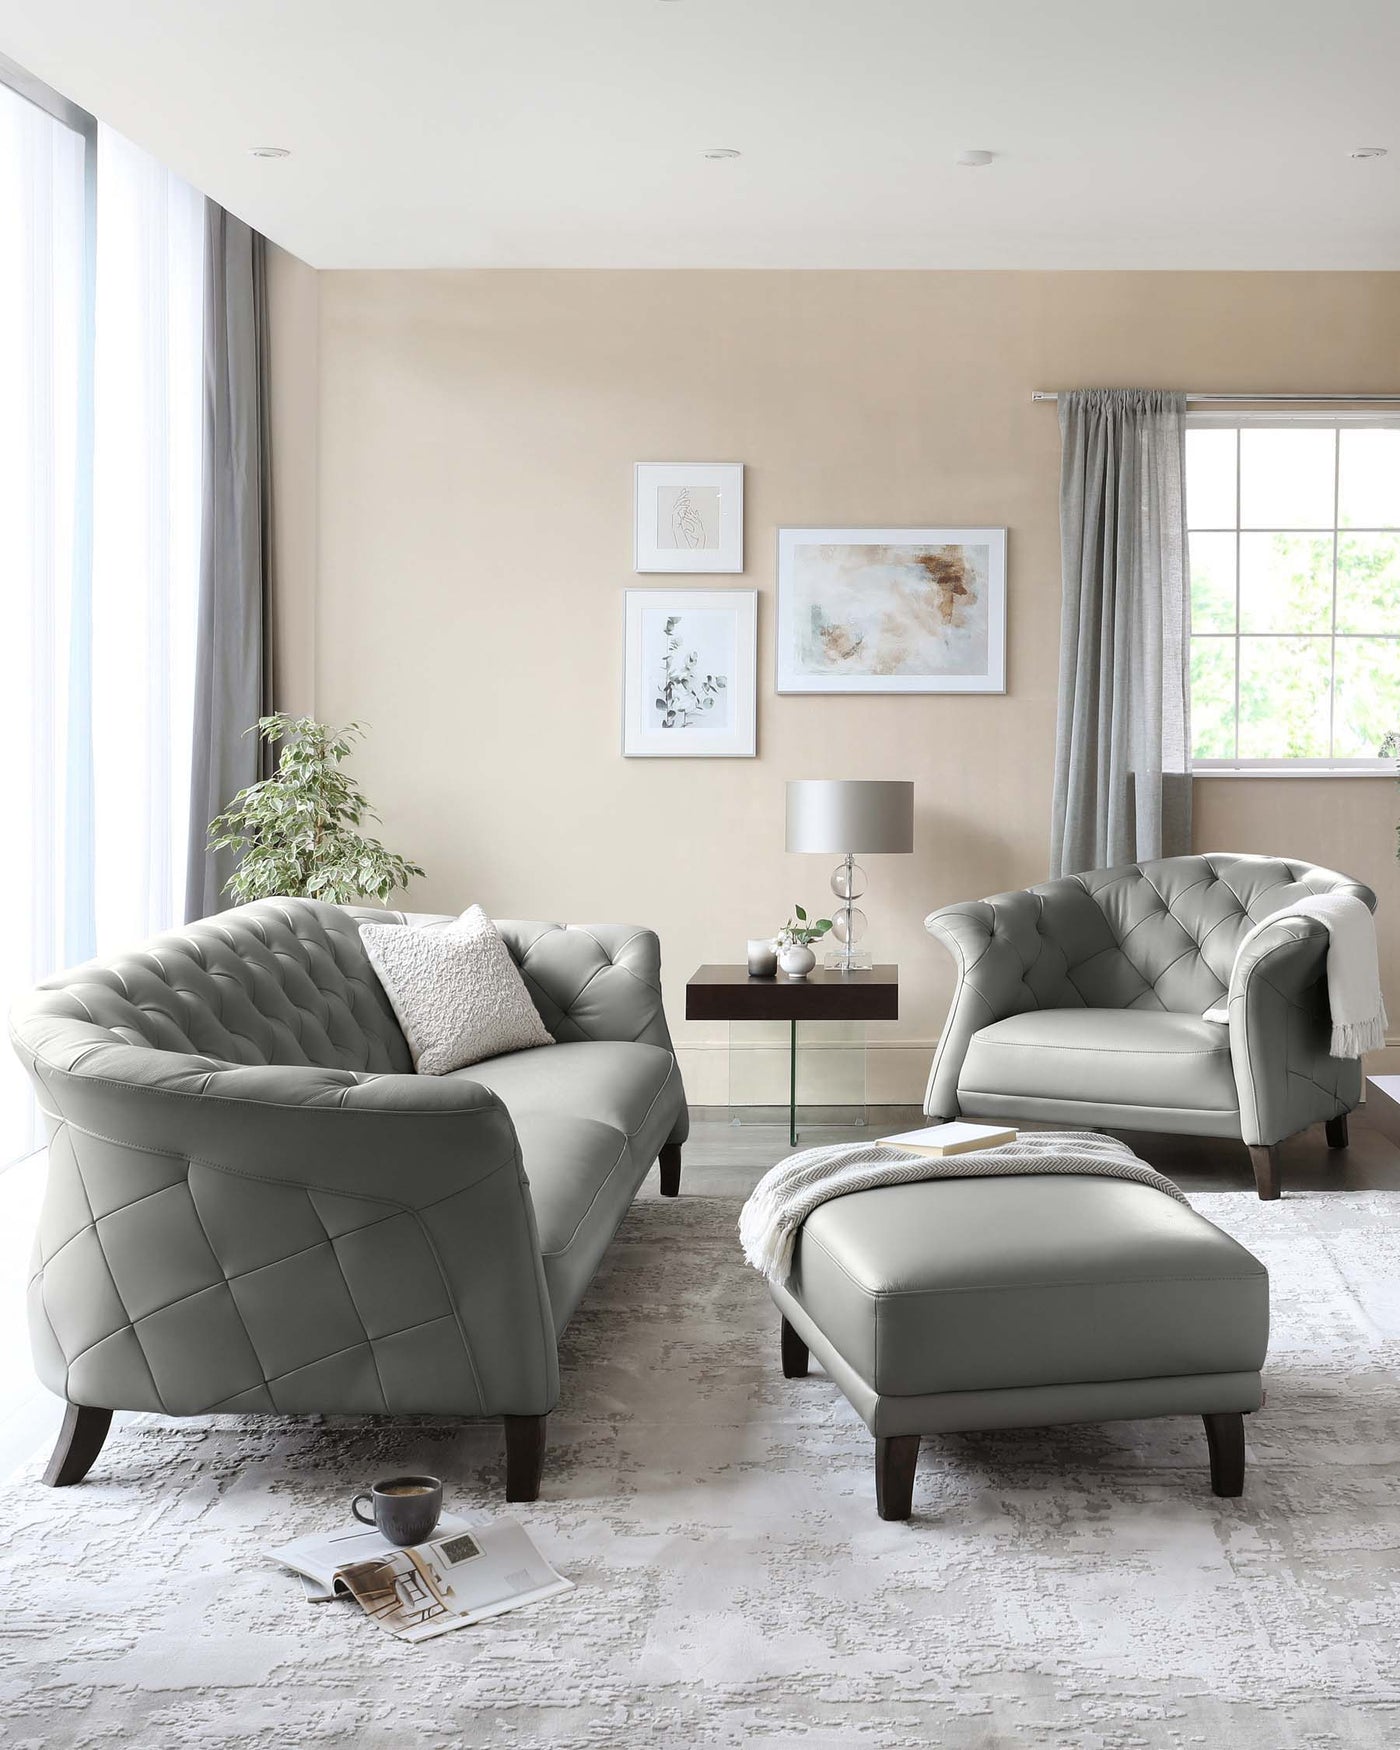 Elegant contemporary living room set featuring a light grey tufted leather sofa with rounded arms and a matching armchair. An upholstered ottoman serves as a footrest or coffee table. A dark wooden side table with a table lamp, decorative vase, and small plant accentuates the ensemble, set on a textured off-white area rug.